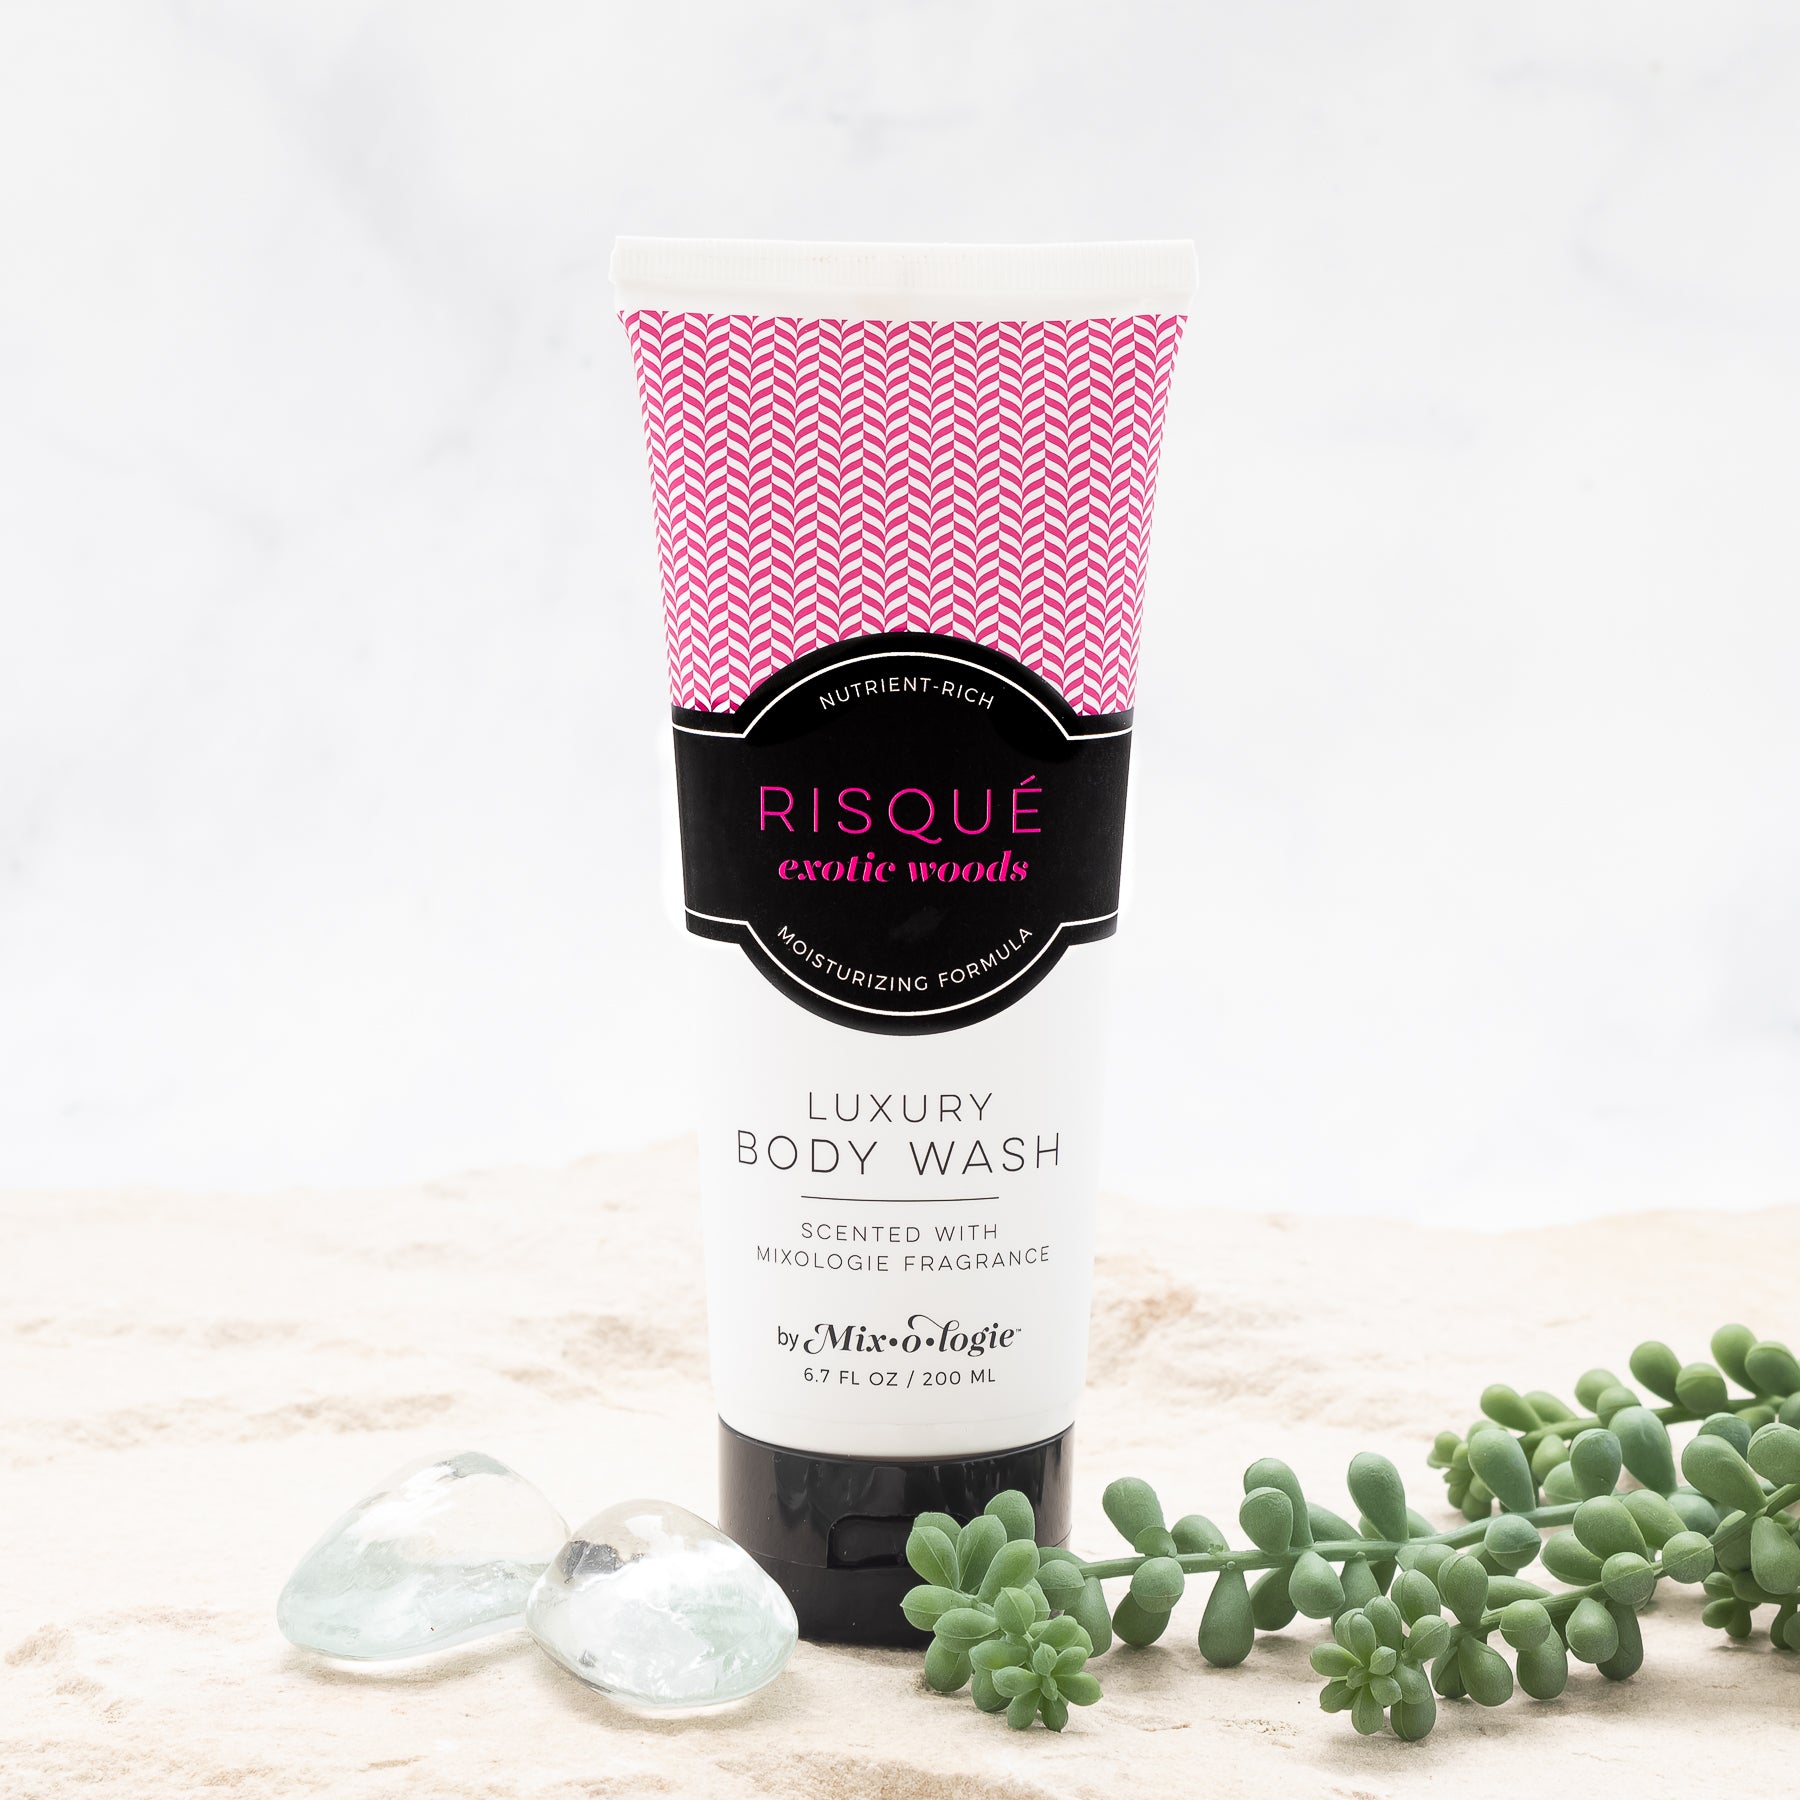 Luxury Body Wash in Risqué (Exotic Woods) in dark pink pattern package and black label in sand with rocks and greenery.